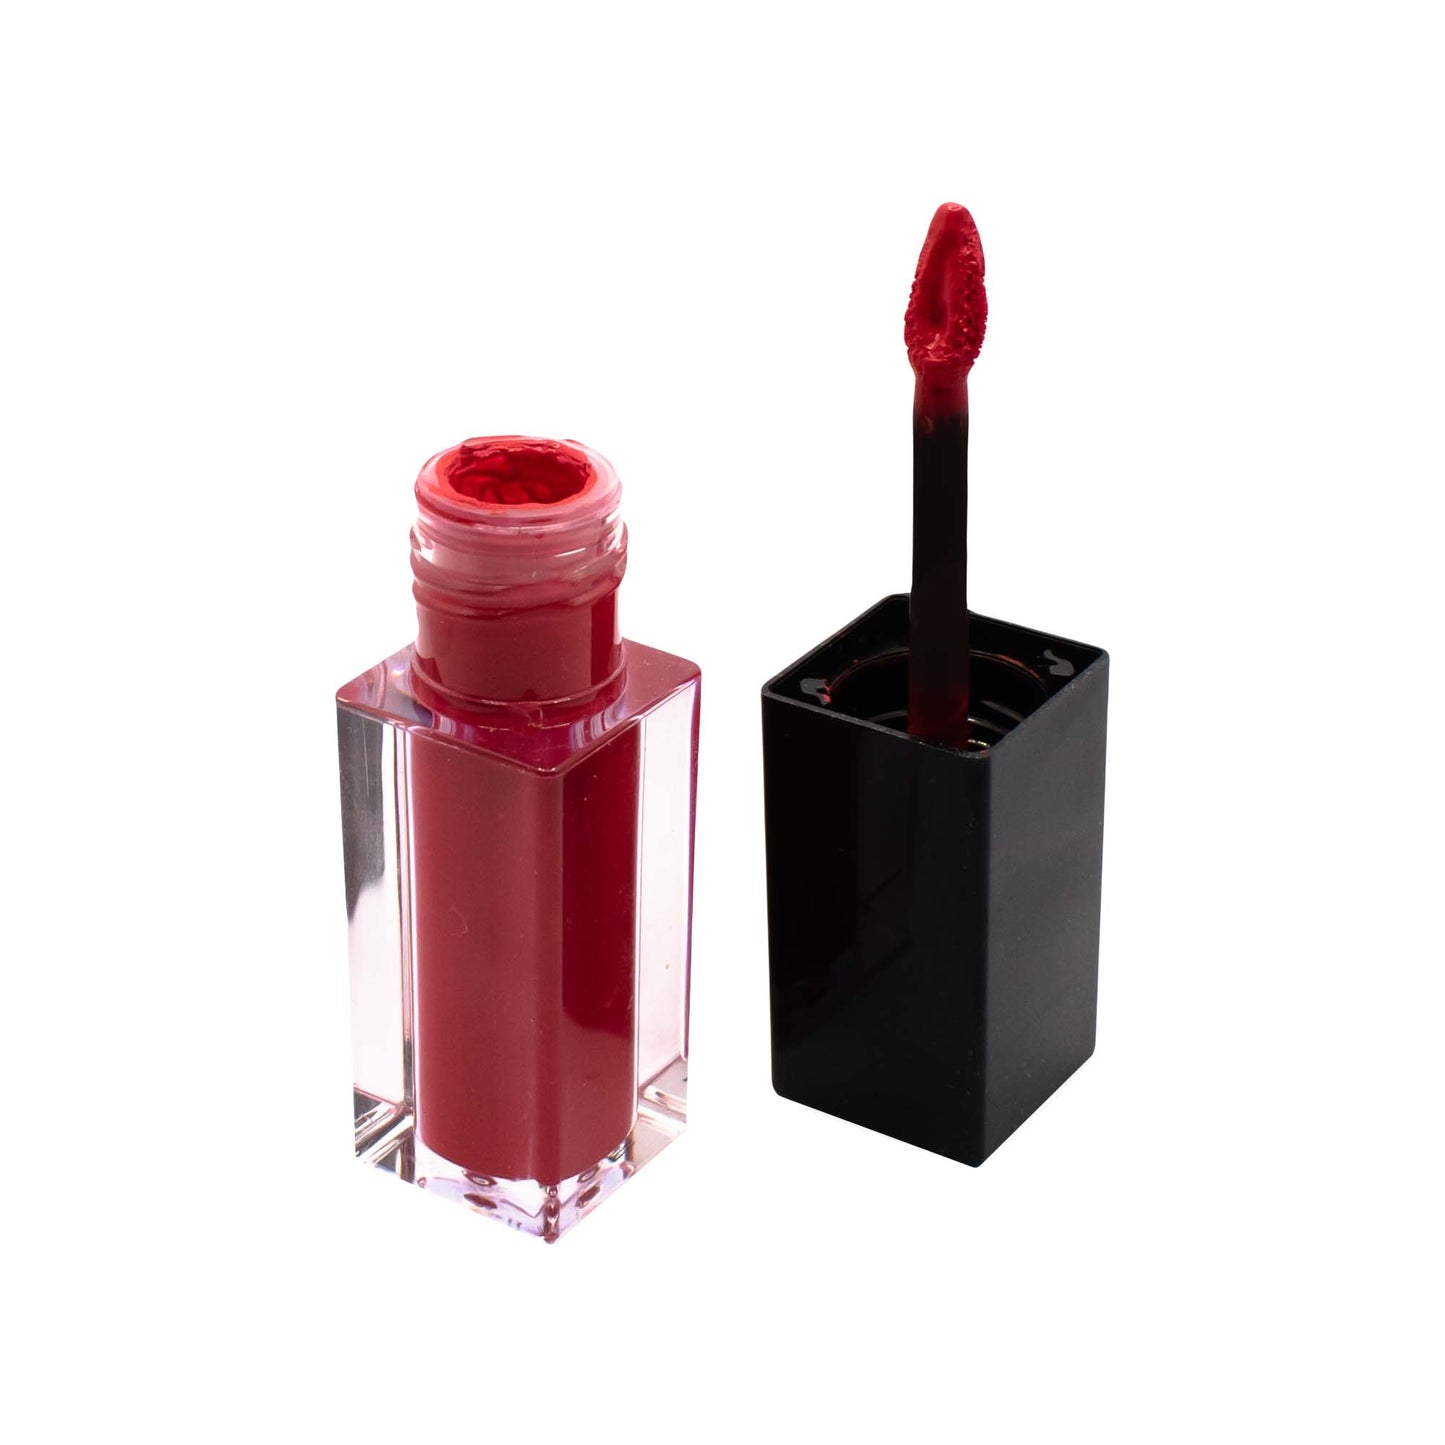 Cruise to victory with Cruisin Organics' Deep Burgundy Lip Stain. Includes Vitamin E for flawless, long-lasting color.